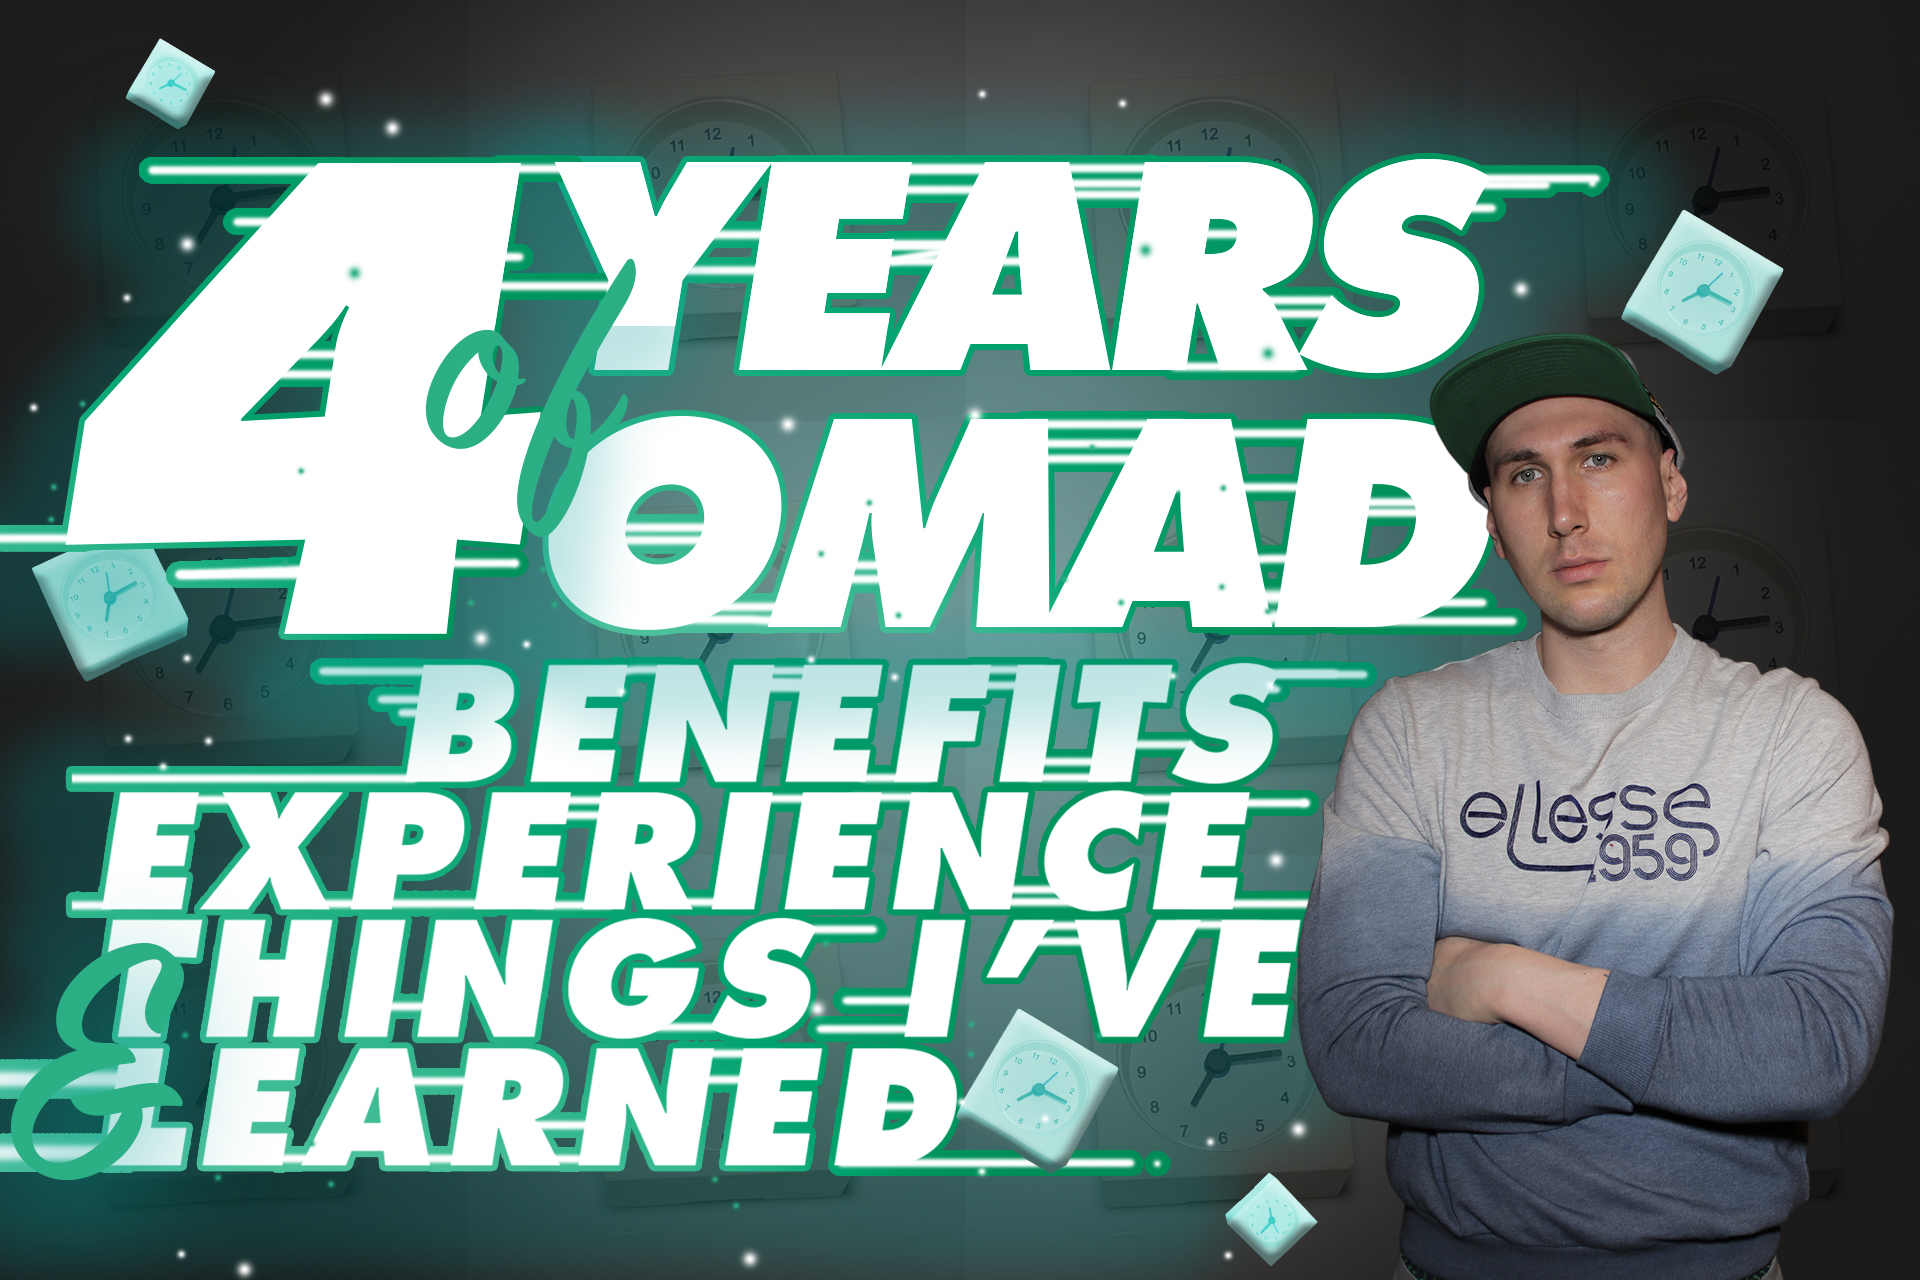 2 years experience